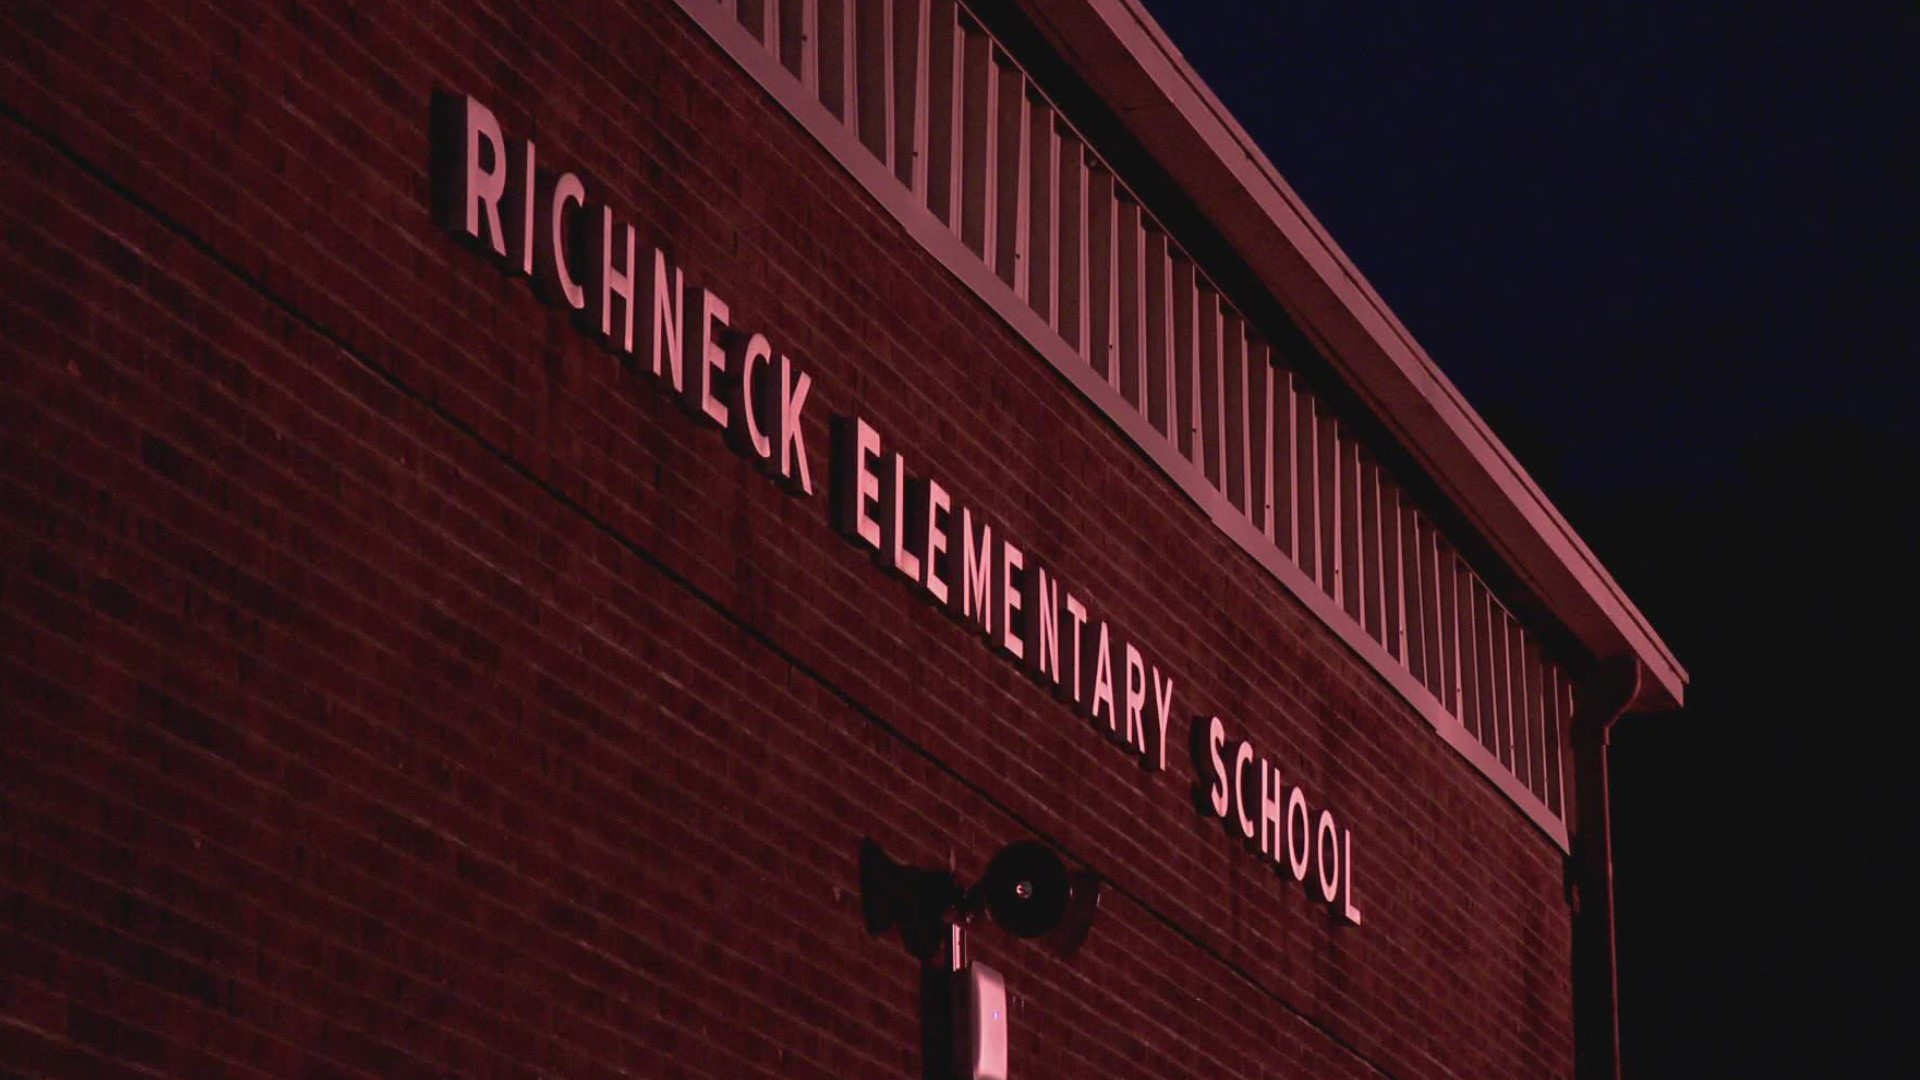 The Richneck building will stay closed from Jan. 23 to 25 and all Newport News schools are closed on Jan. 26 and 27.